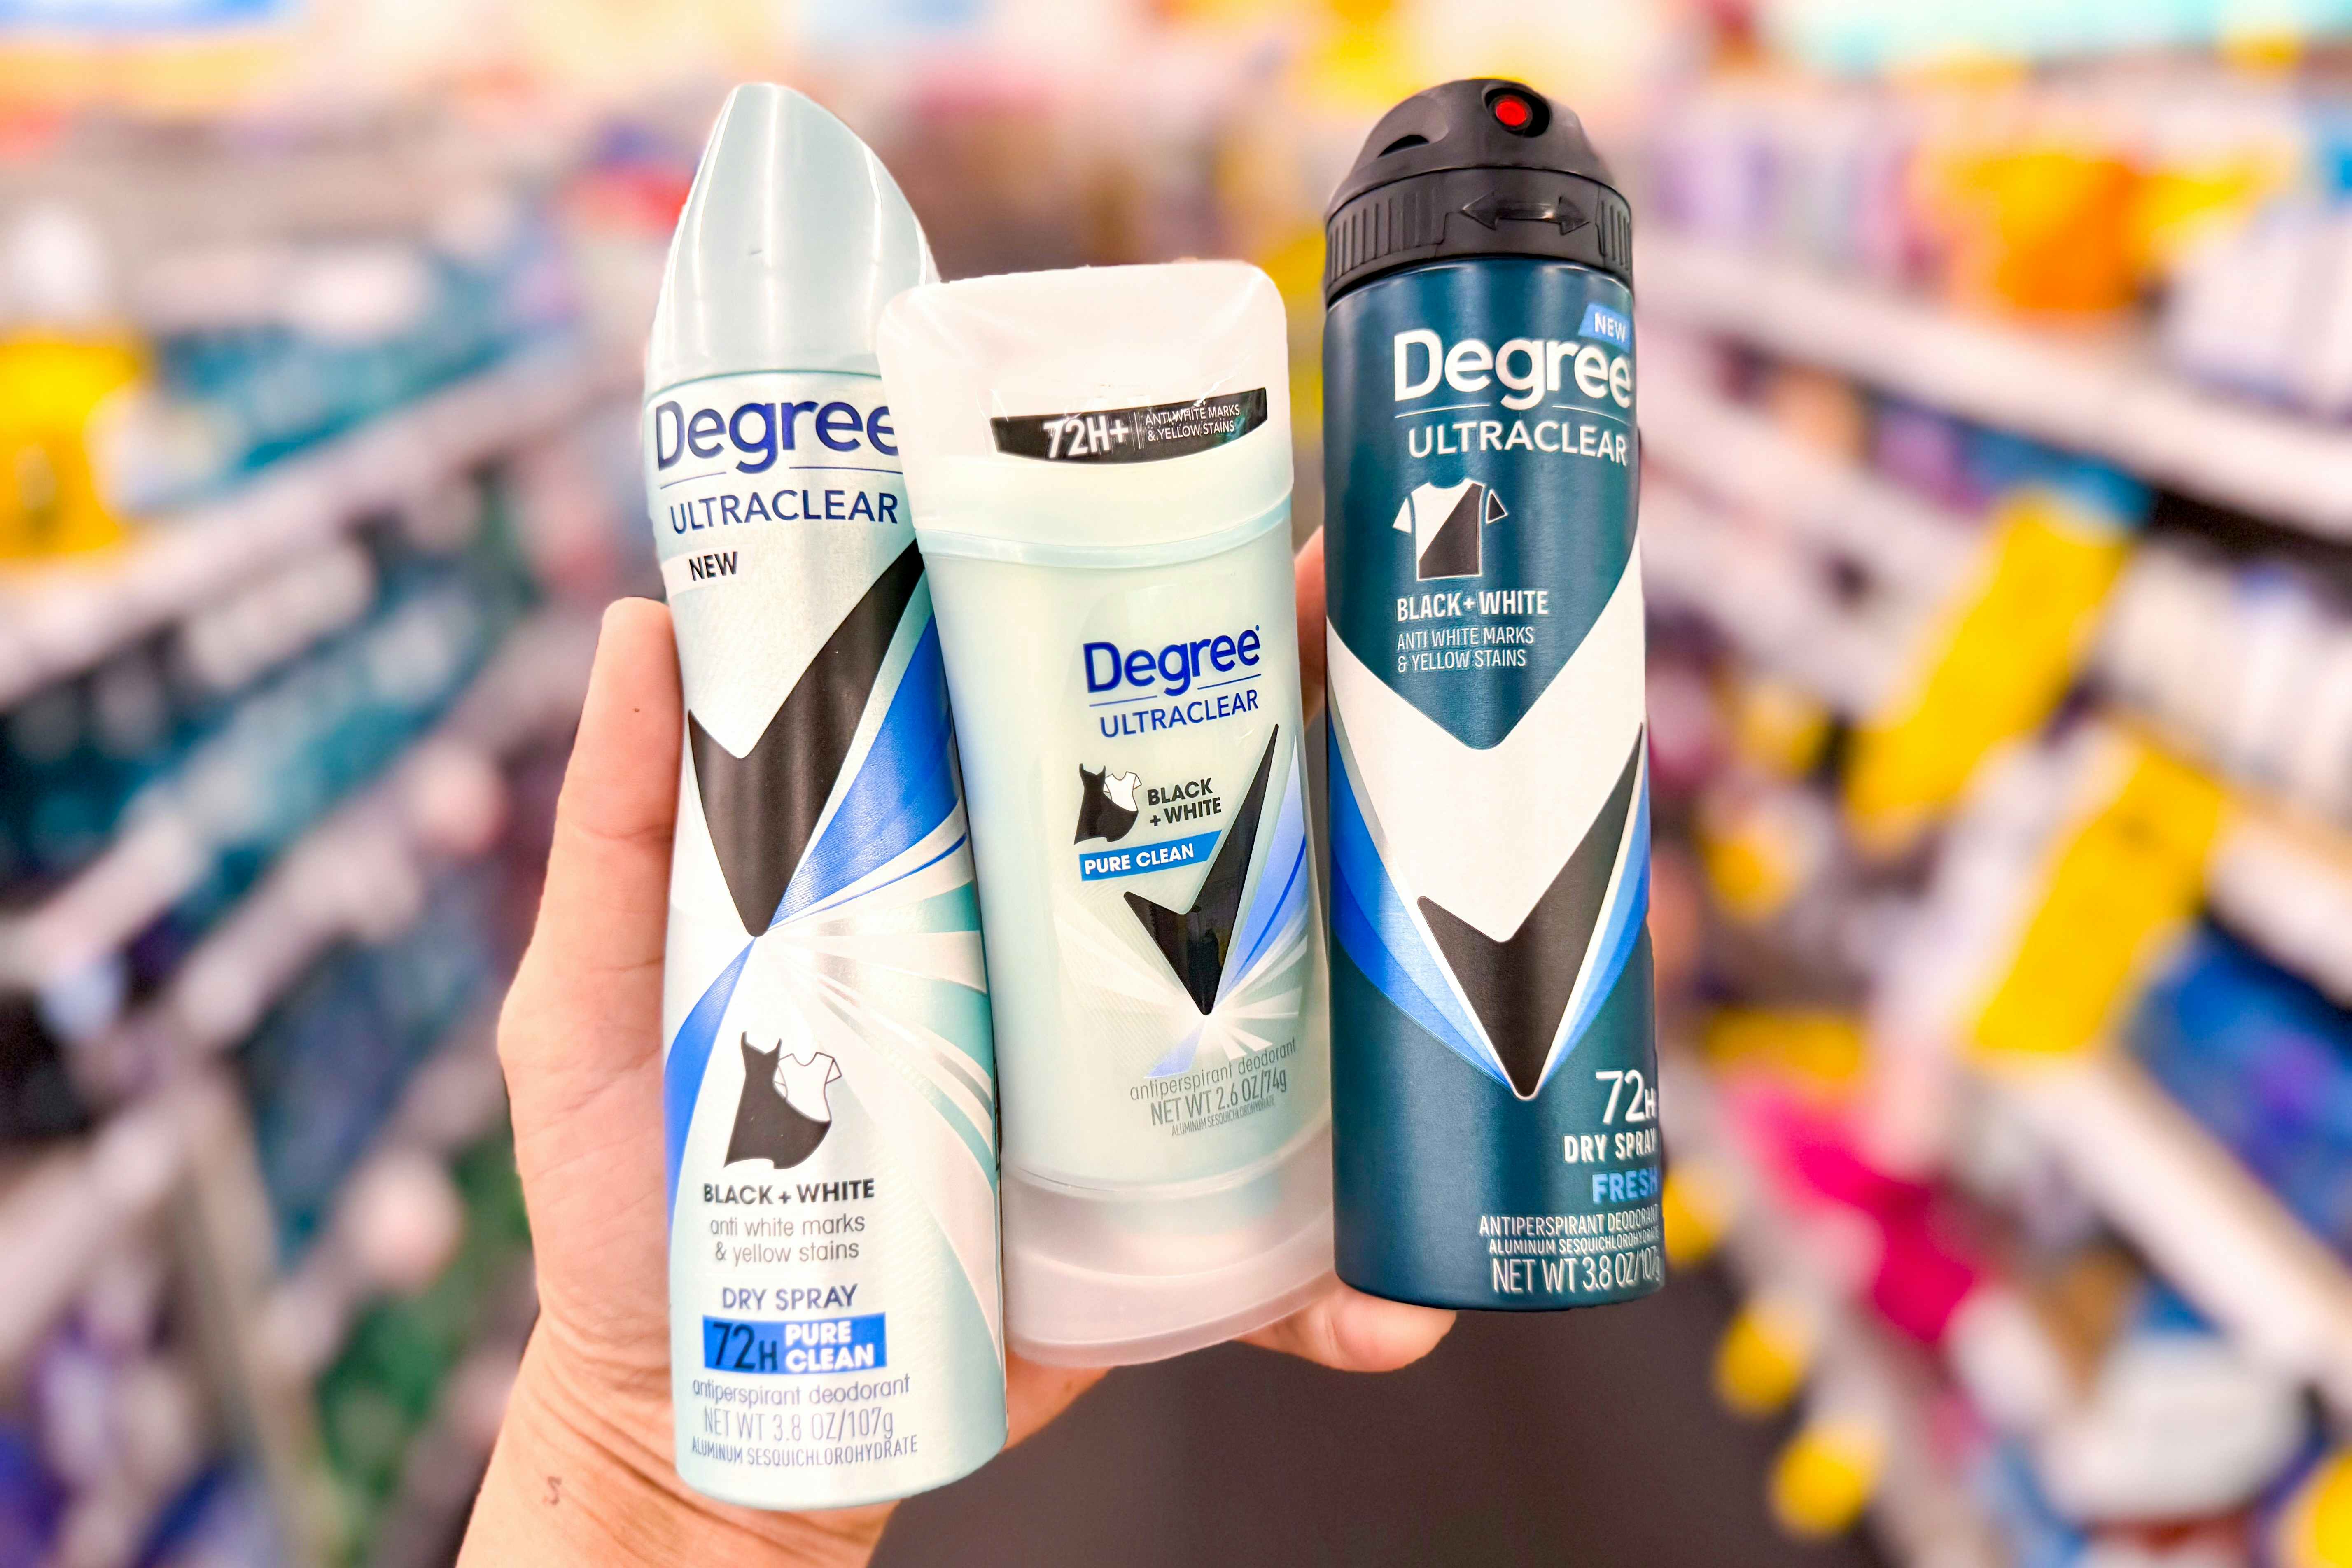 Get $2 Off Degree Deodorant Sticks and Dry Sprays at Target and CVS